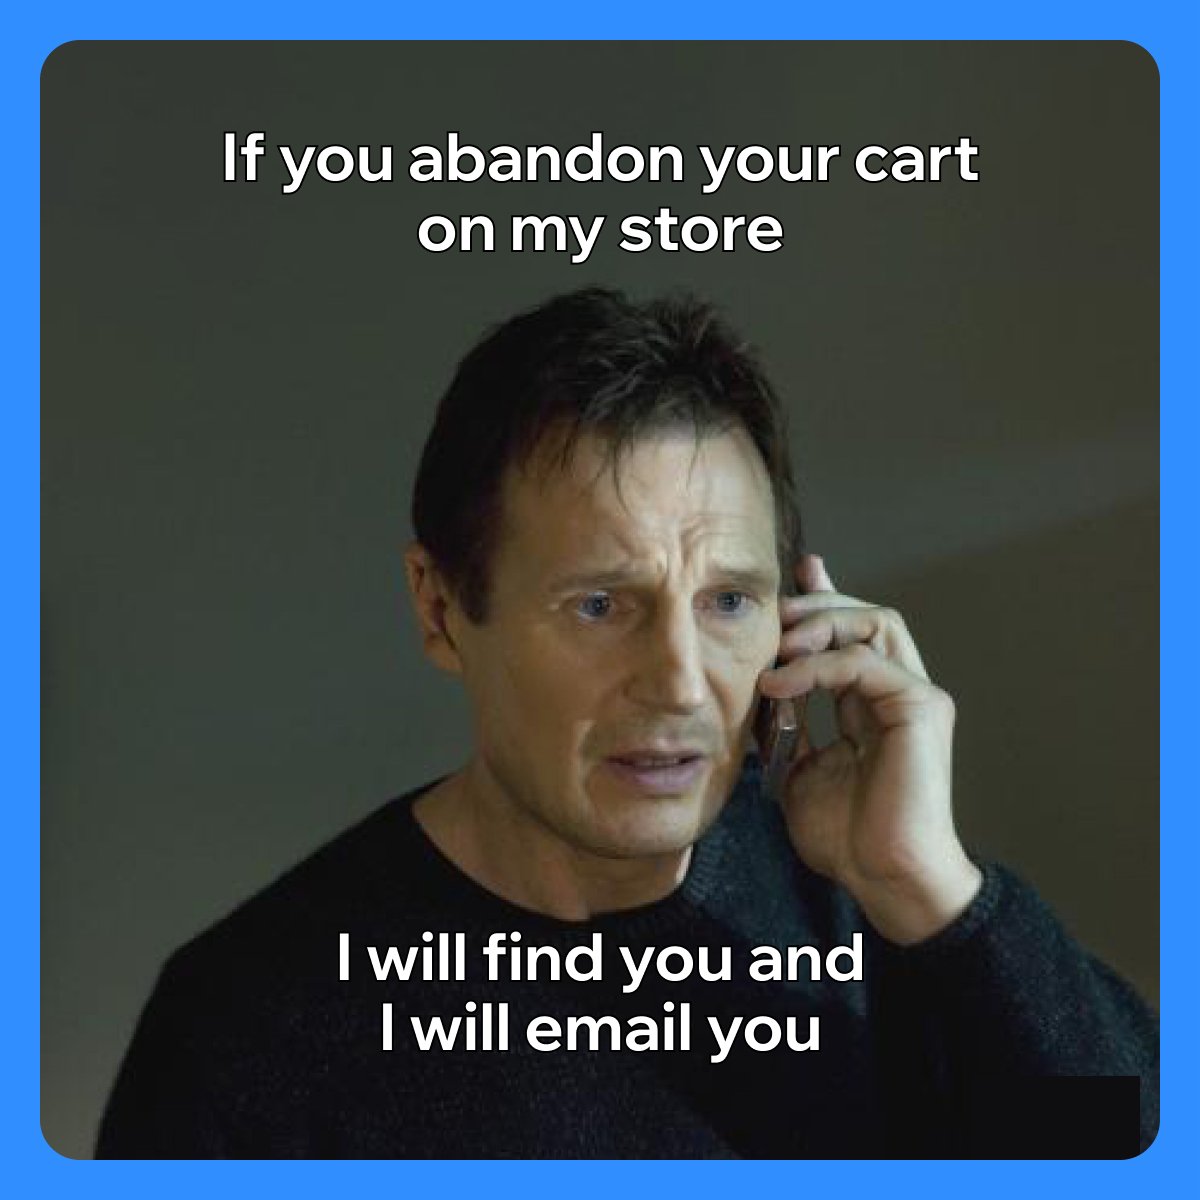 Bryan Mills from the movie Taken talking on the phone over a dark background. 

Text above his head reads: "If you abandon your cart on my store"

Text below his chin reads: "I will find you and I will email you"